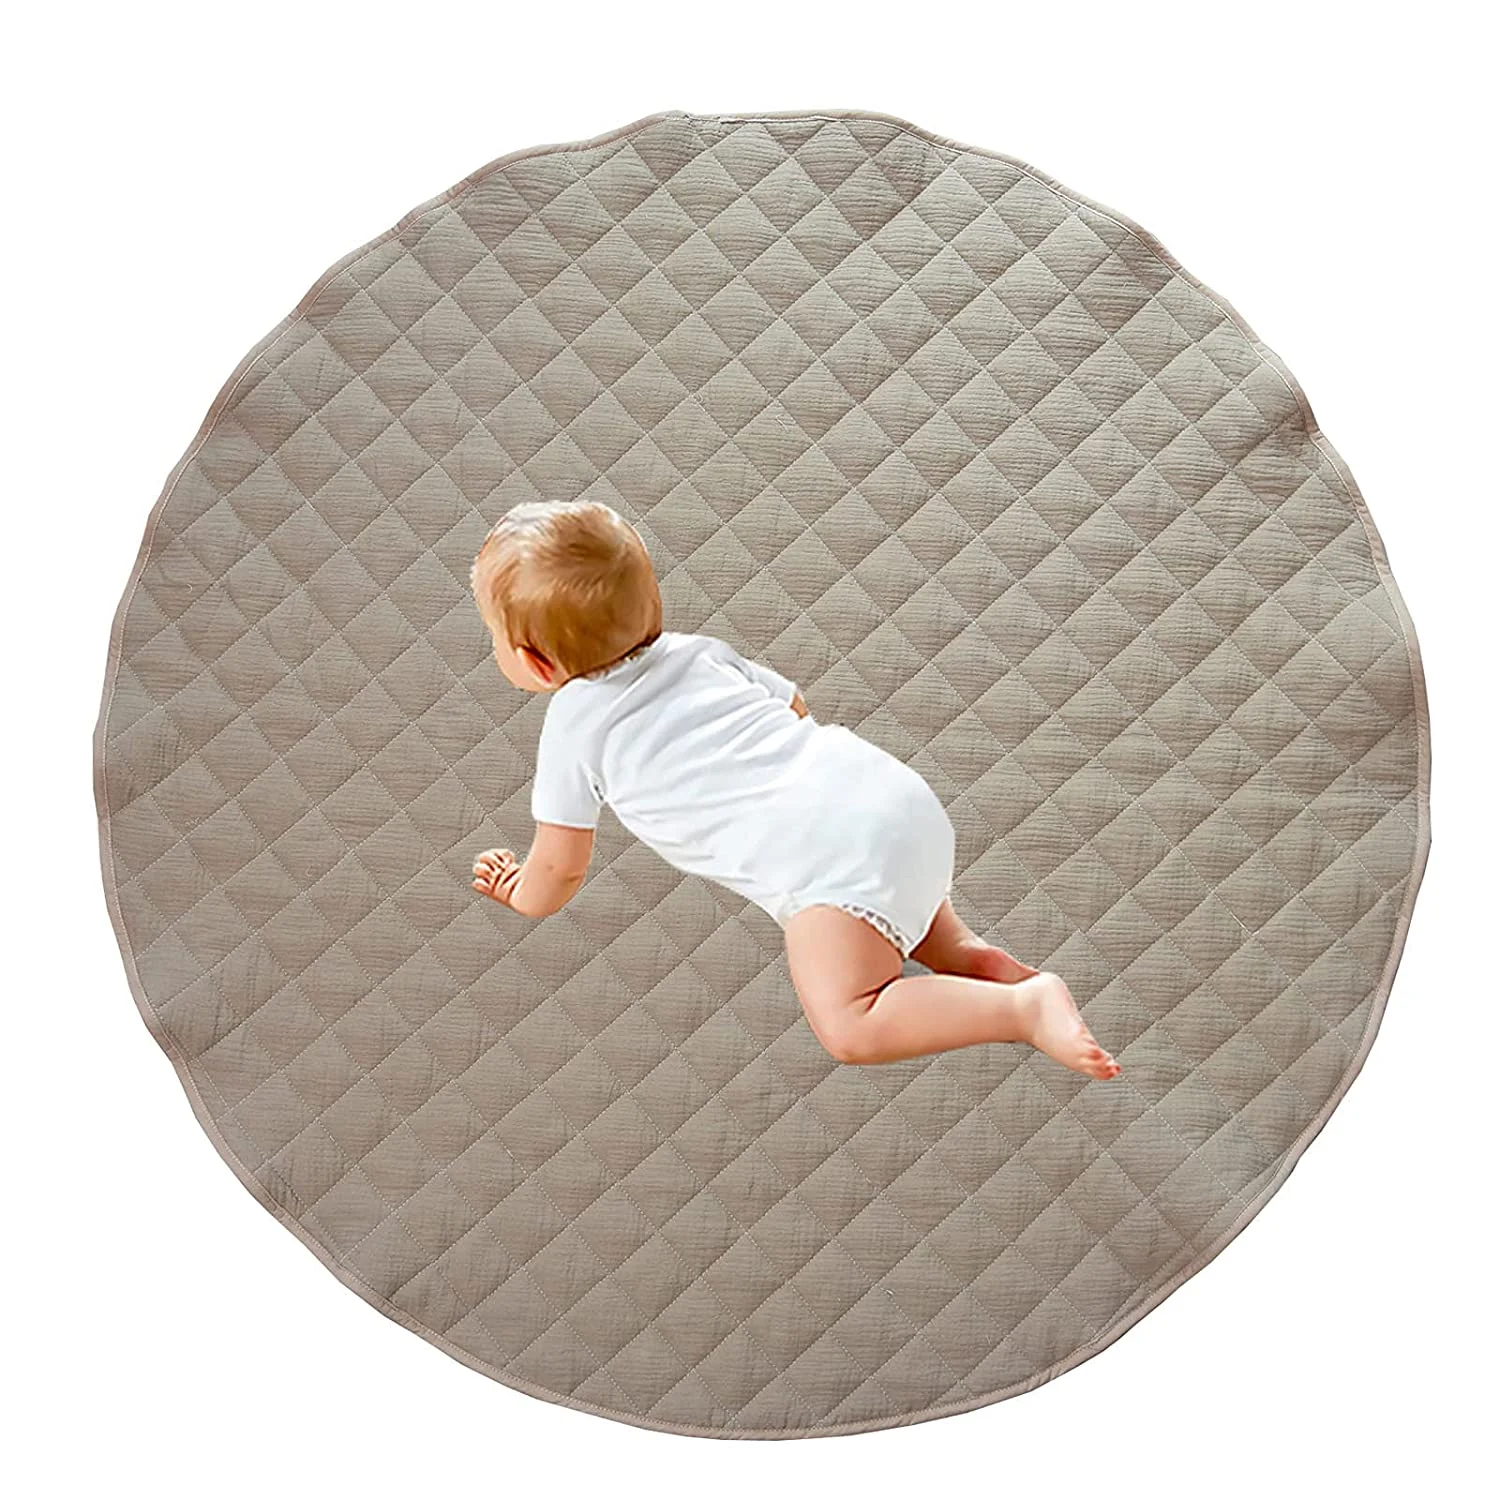 40 Inches In Diameter Large Thick Room Rug Plain Color Double Sided Use Portable Kids Tummy Time Playmat for Indoor Outdoor